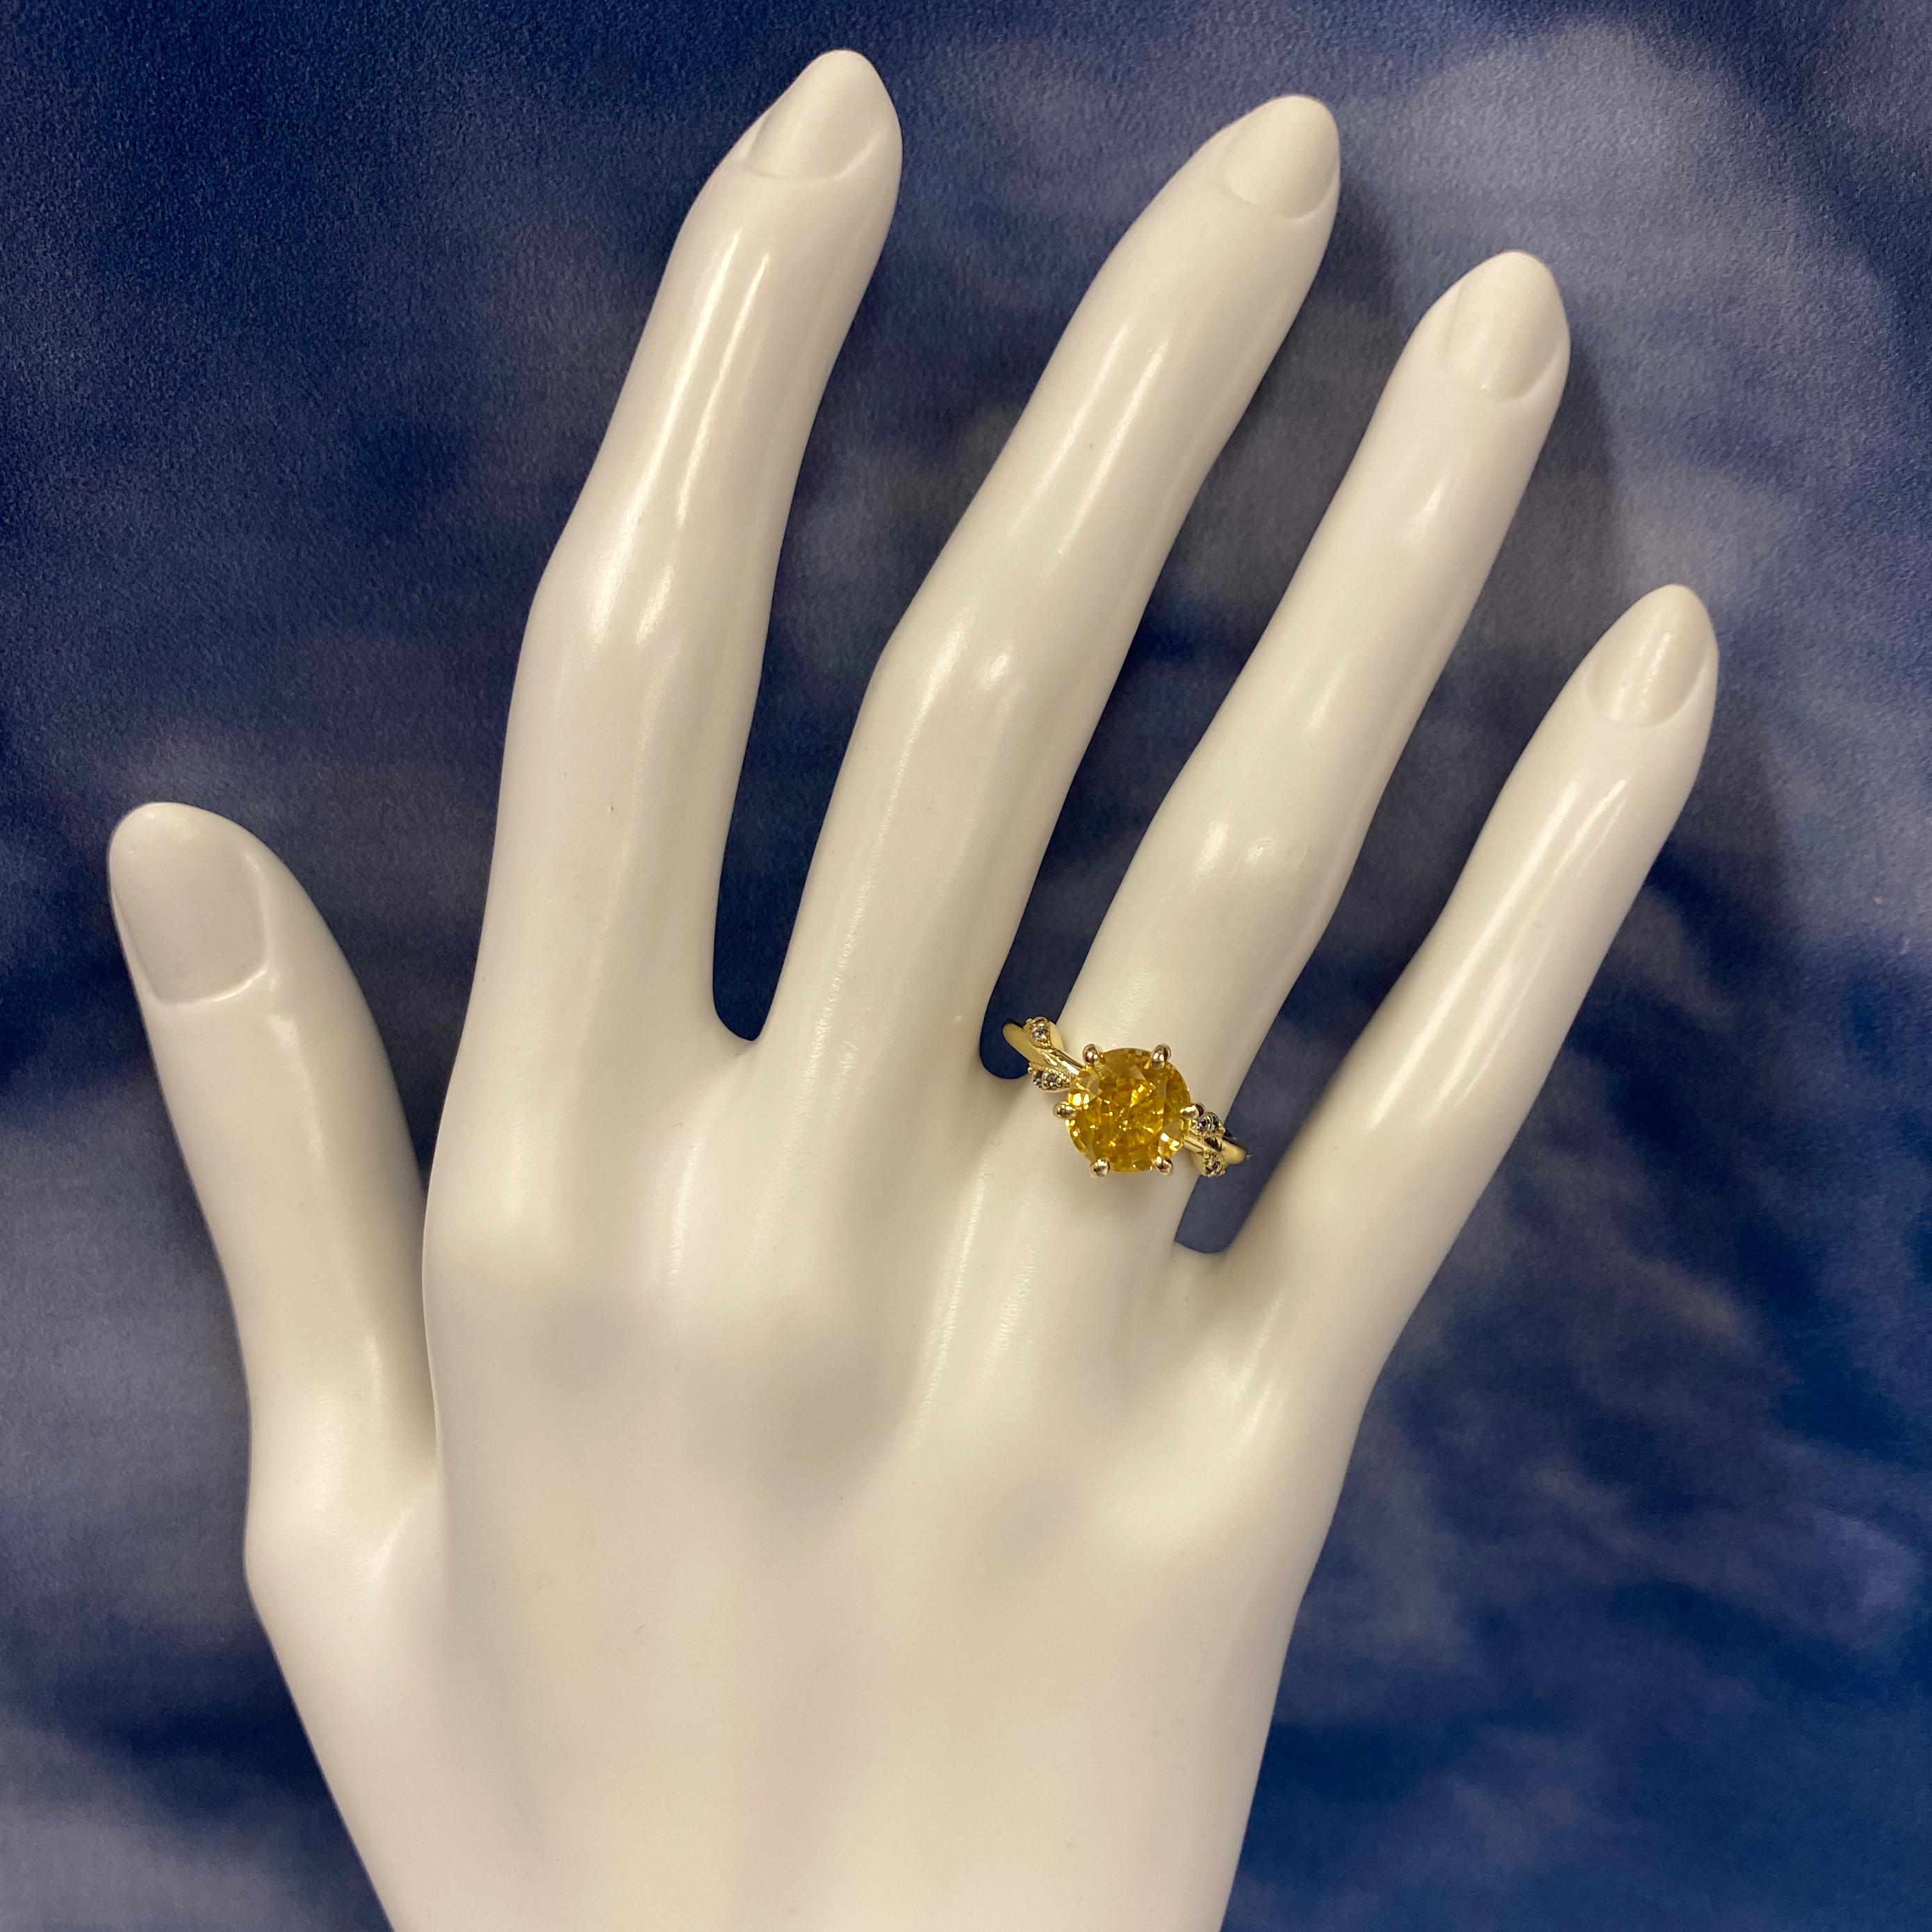 GIA-Certified 2.29 Carat Yellow Sapphire Ring with Tiny Sapphires in 18K Gold In New Condition For Sale In Sherman Oaks, CA